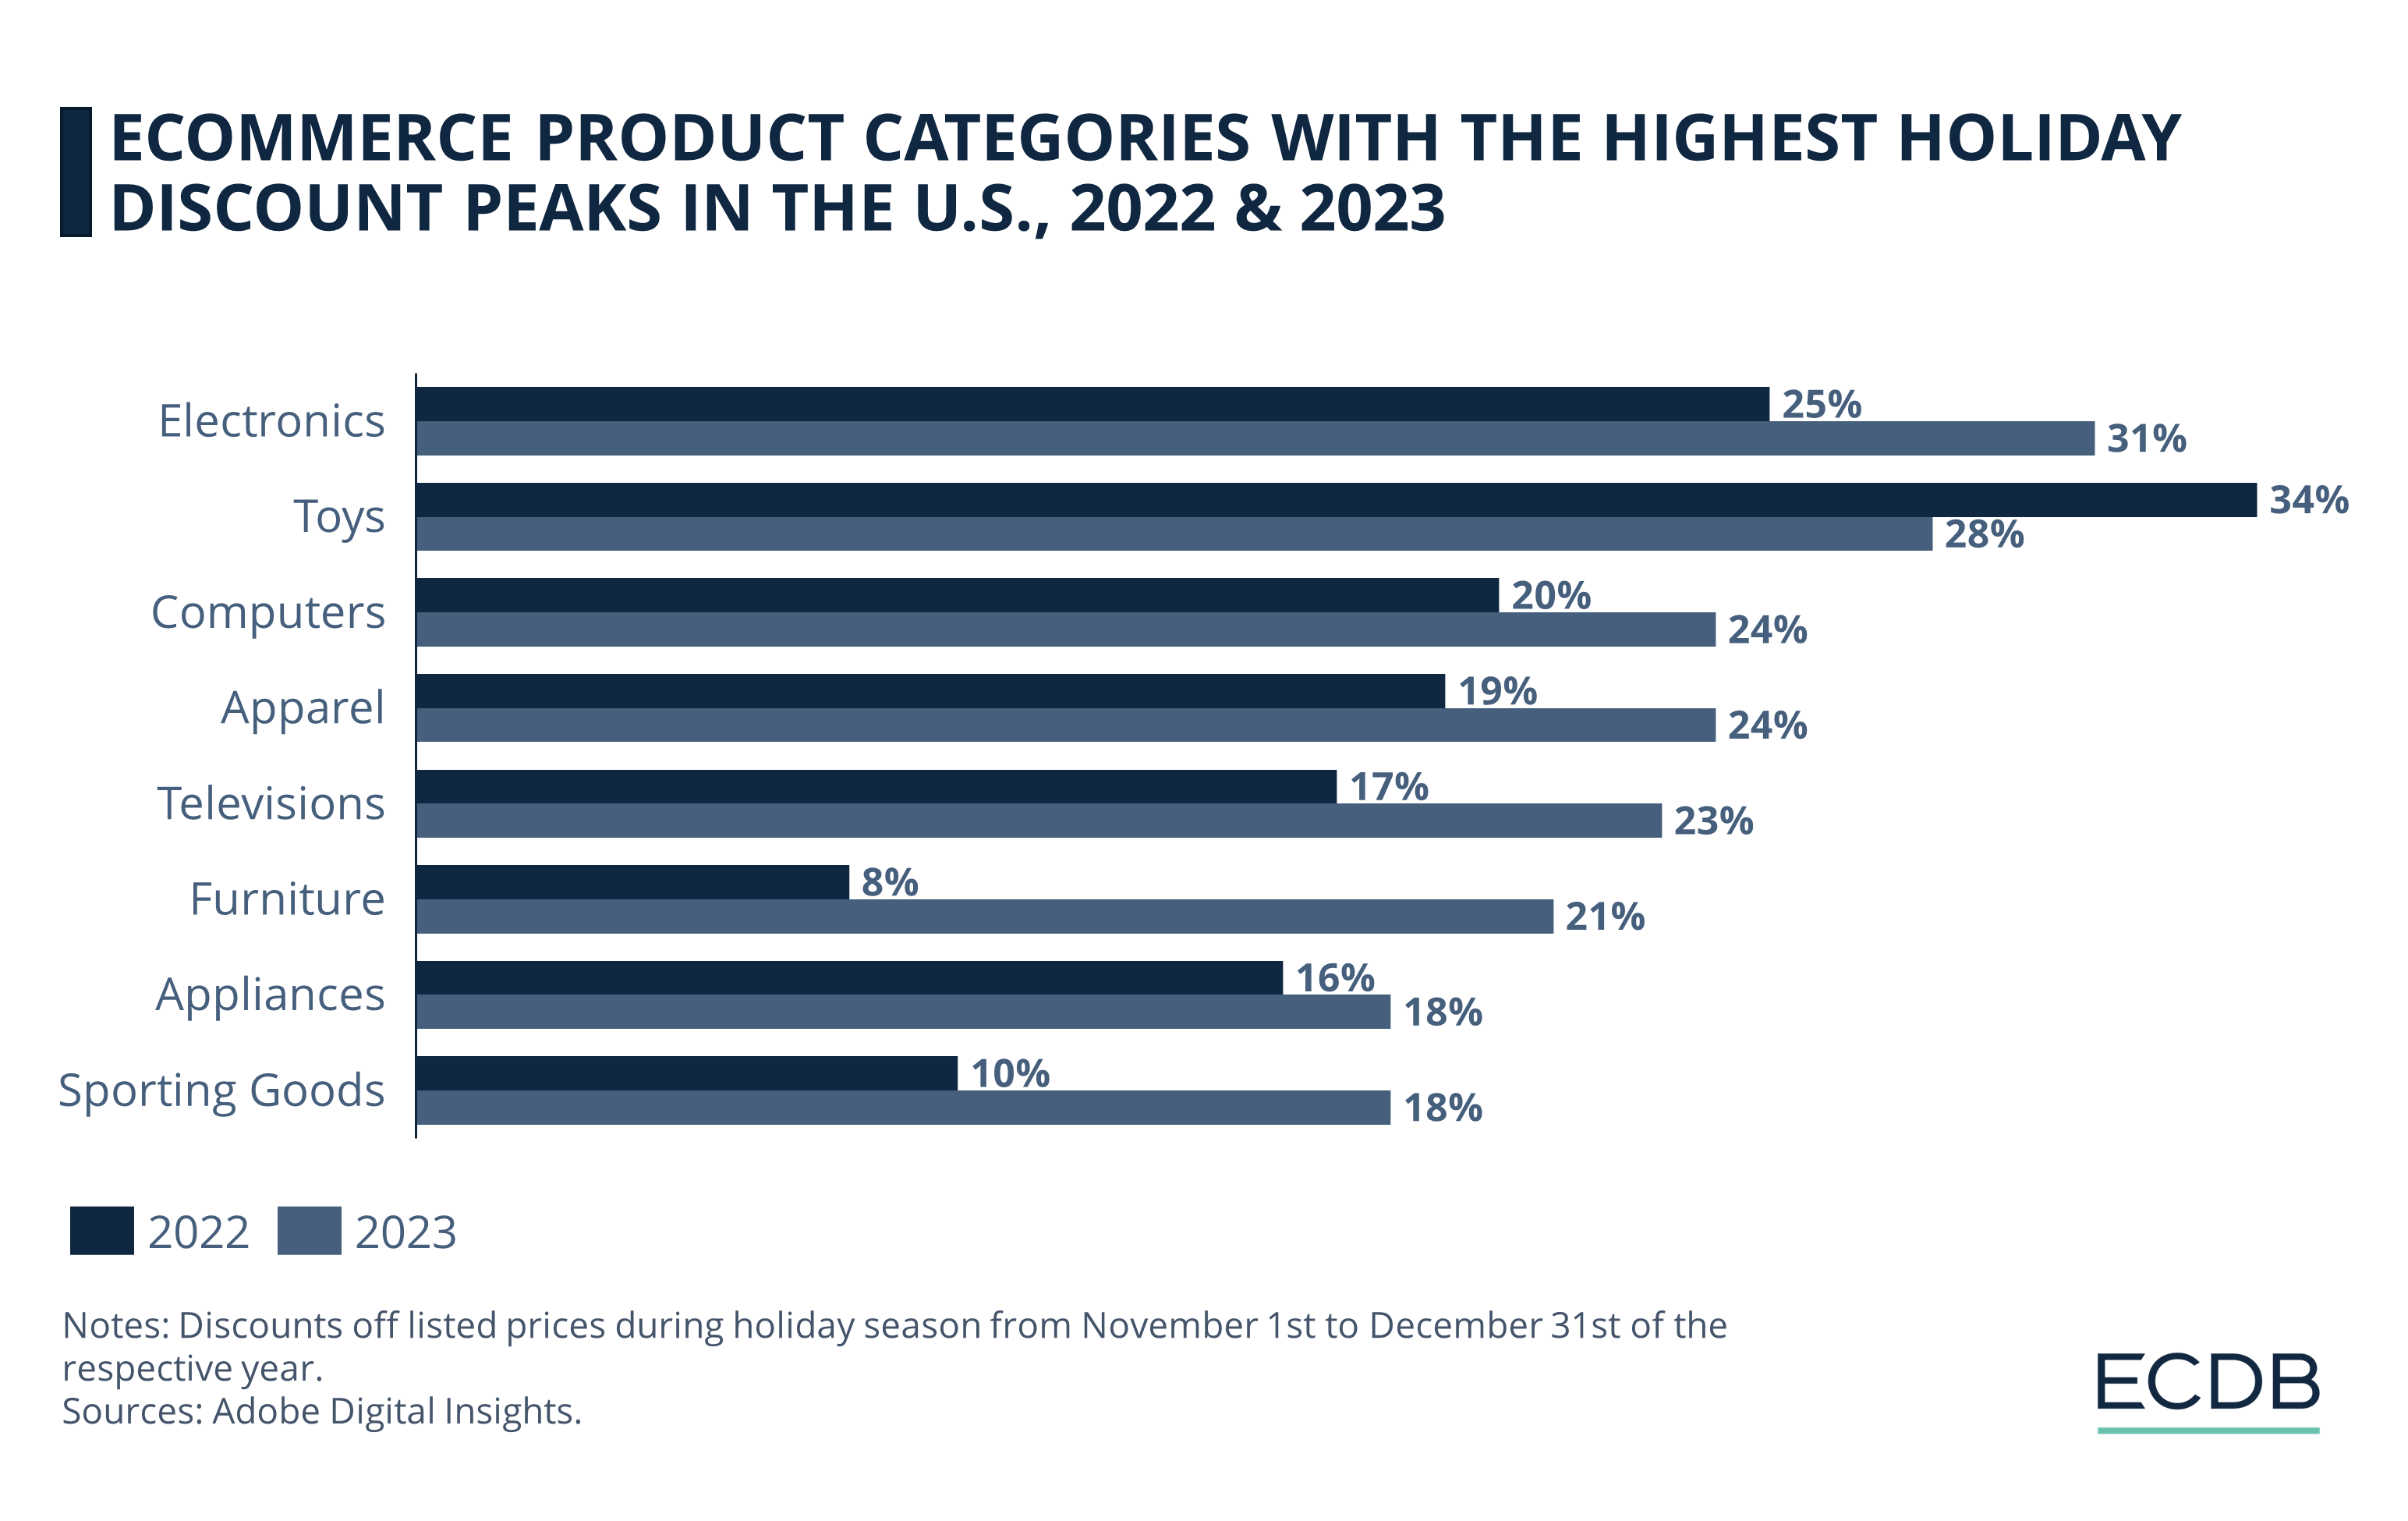 eCommerce Product Categories With the Highest Holiday Discount Peak in the U.S., 2023